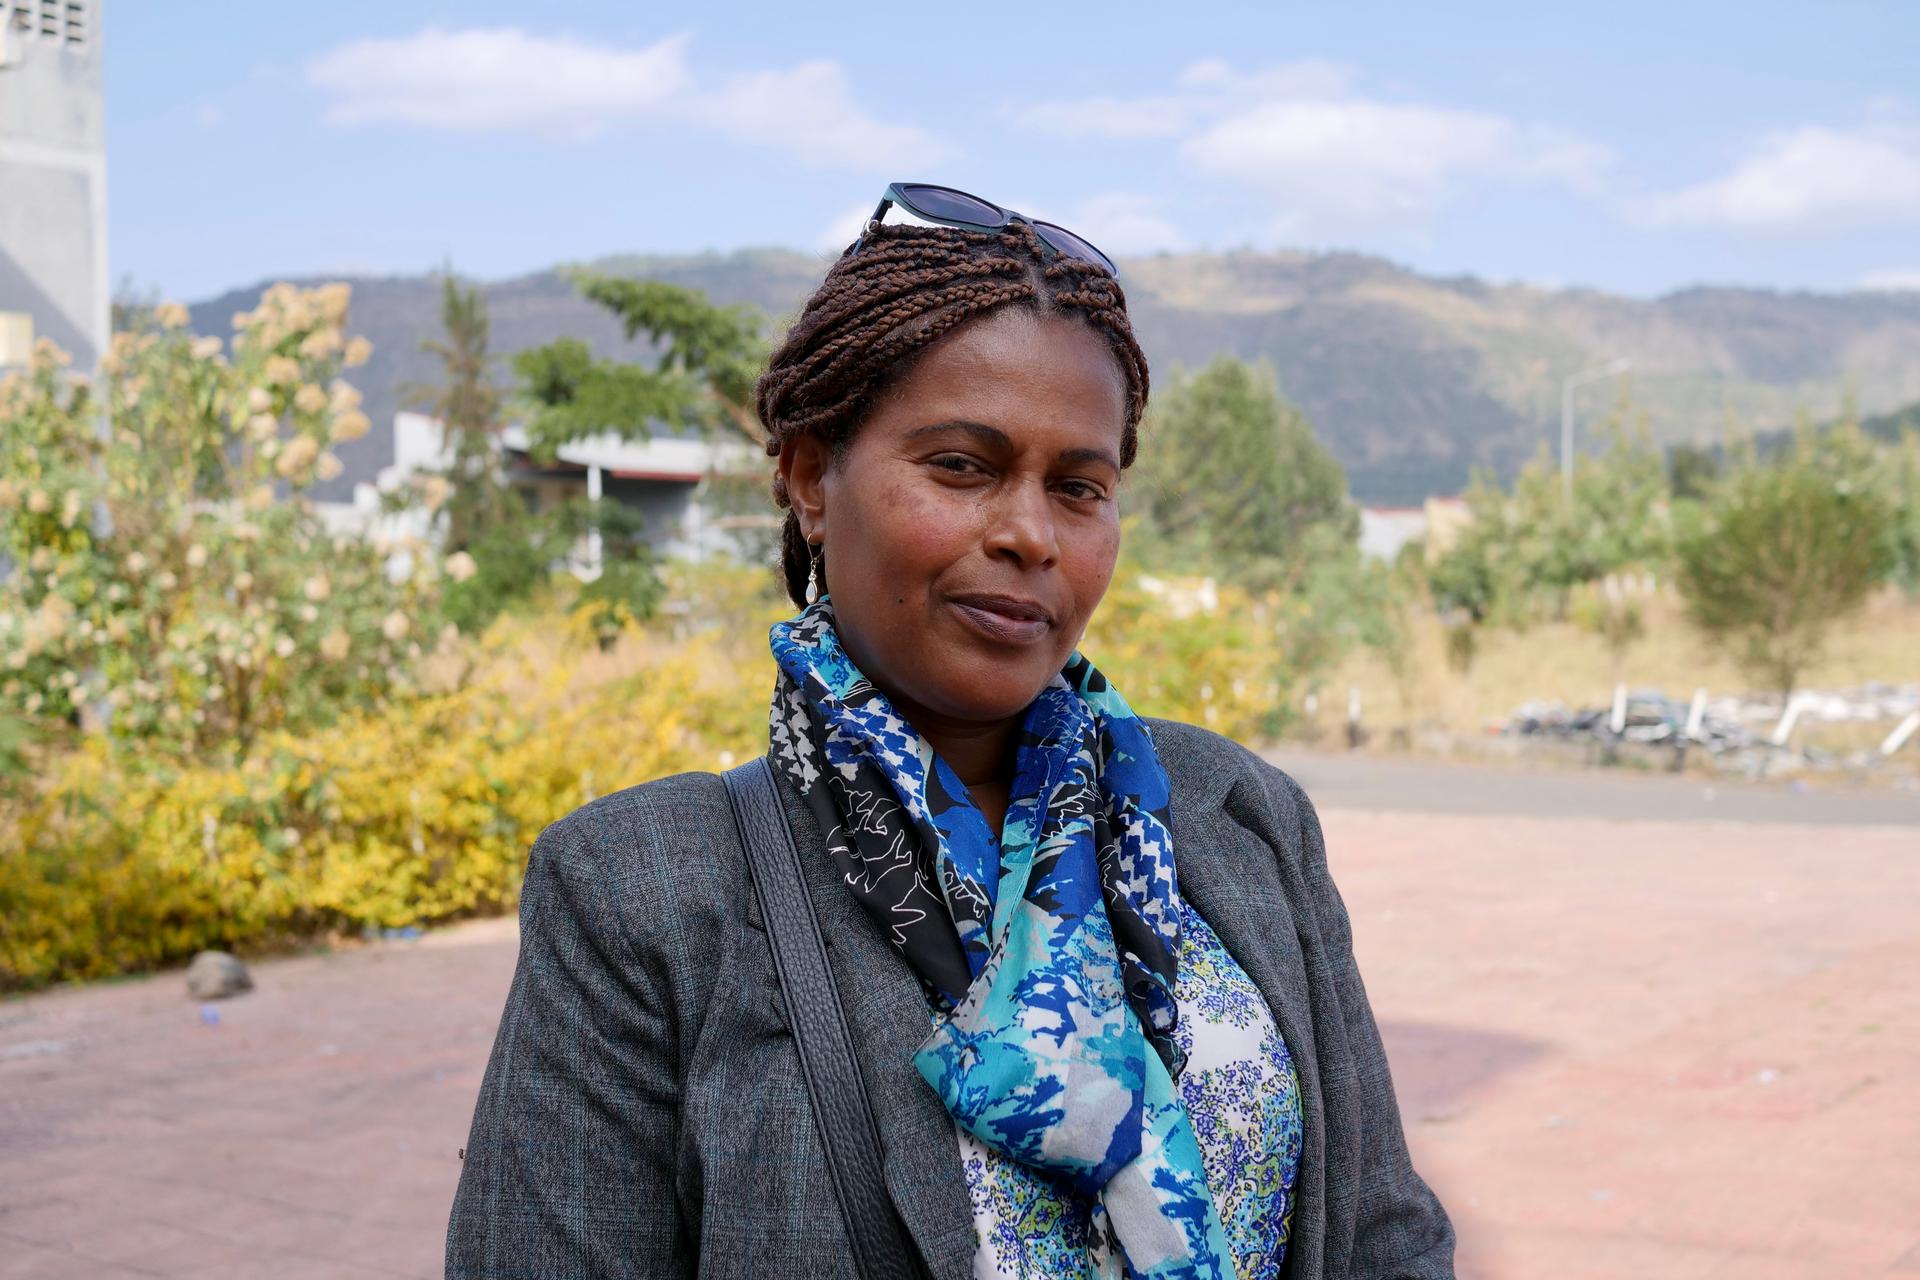 Mastewal Mekonnen is a psychological counselor at Addis Ababa University. Here, she's volunteering at a support program for victims of sexual and gender-based violence in Woldiya University, Woldiya, Ethiopia. Feb. 19, 2022.